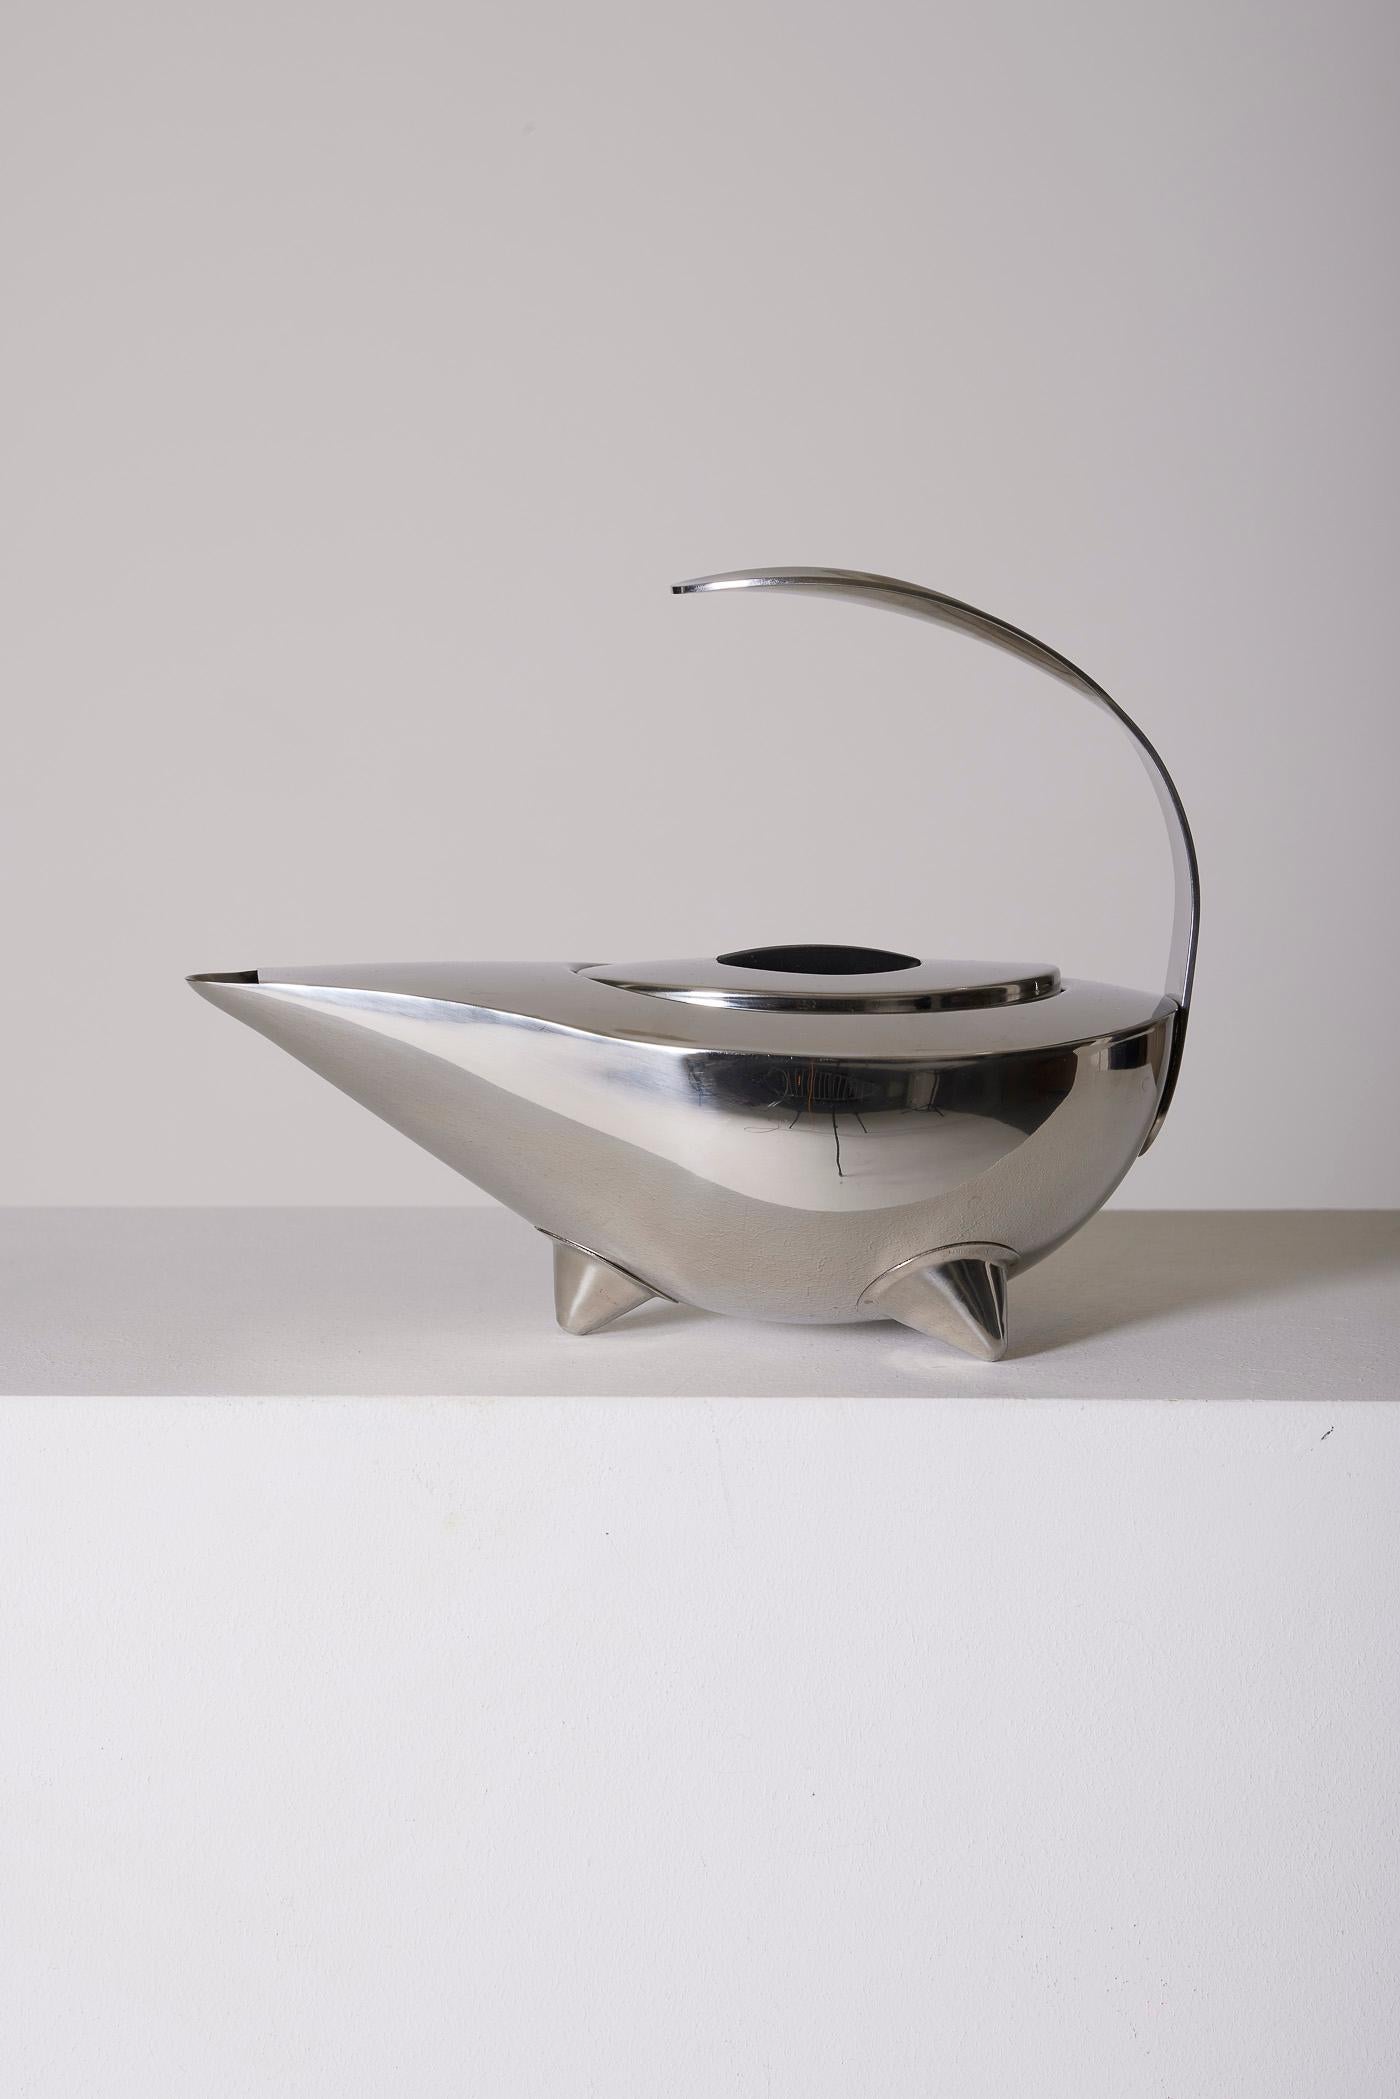 Stainless steel teapot by Danish designer Carsten Jorgensen for Bodum, from the 1980s. In perfect condition.
LP2595